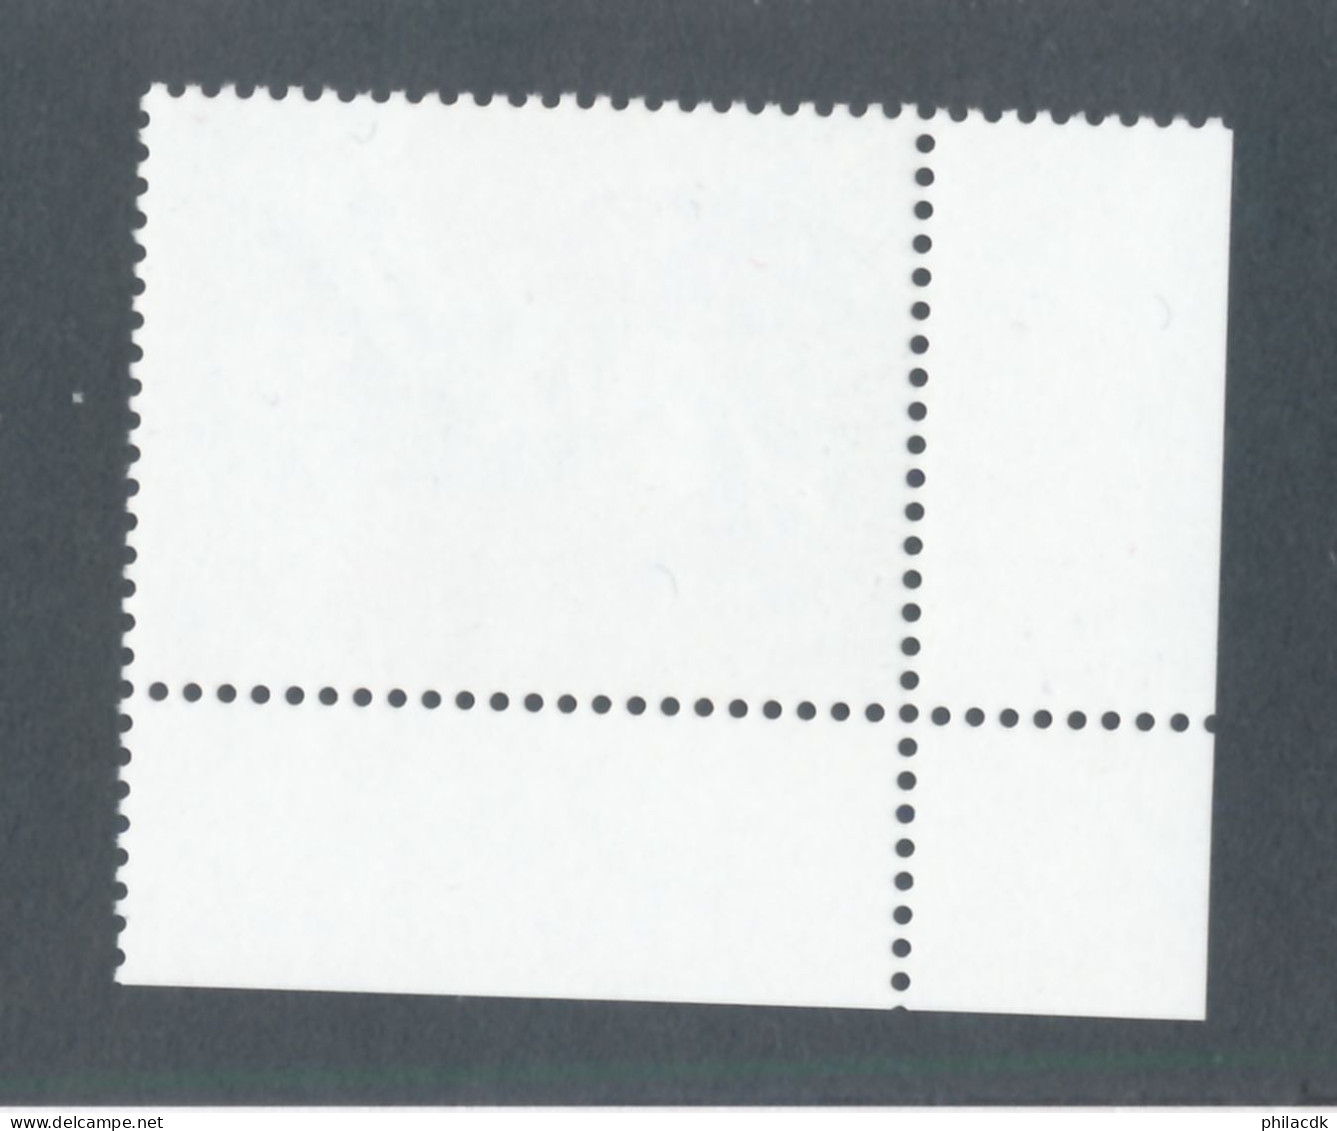 NATIONS UNIES KOSOVO - N° 92 NEUF** SANS CHARNIERE AVEC BORDS DE FEUILLE - 2008 - Unused Stamps